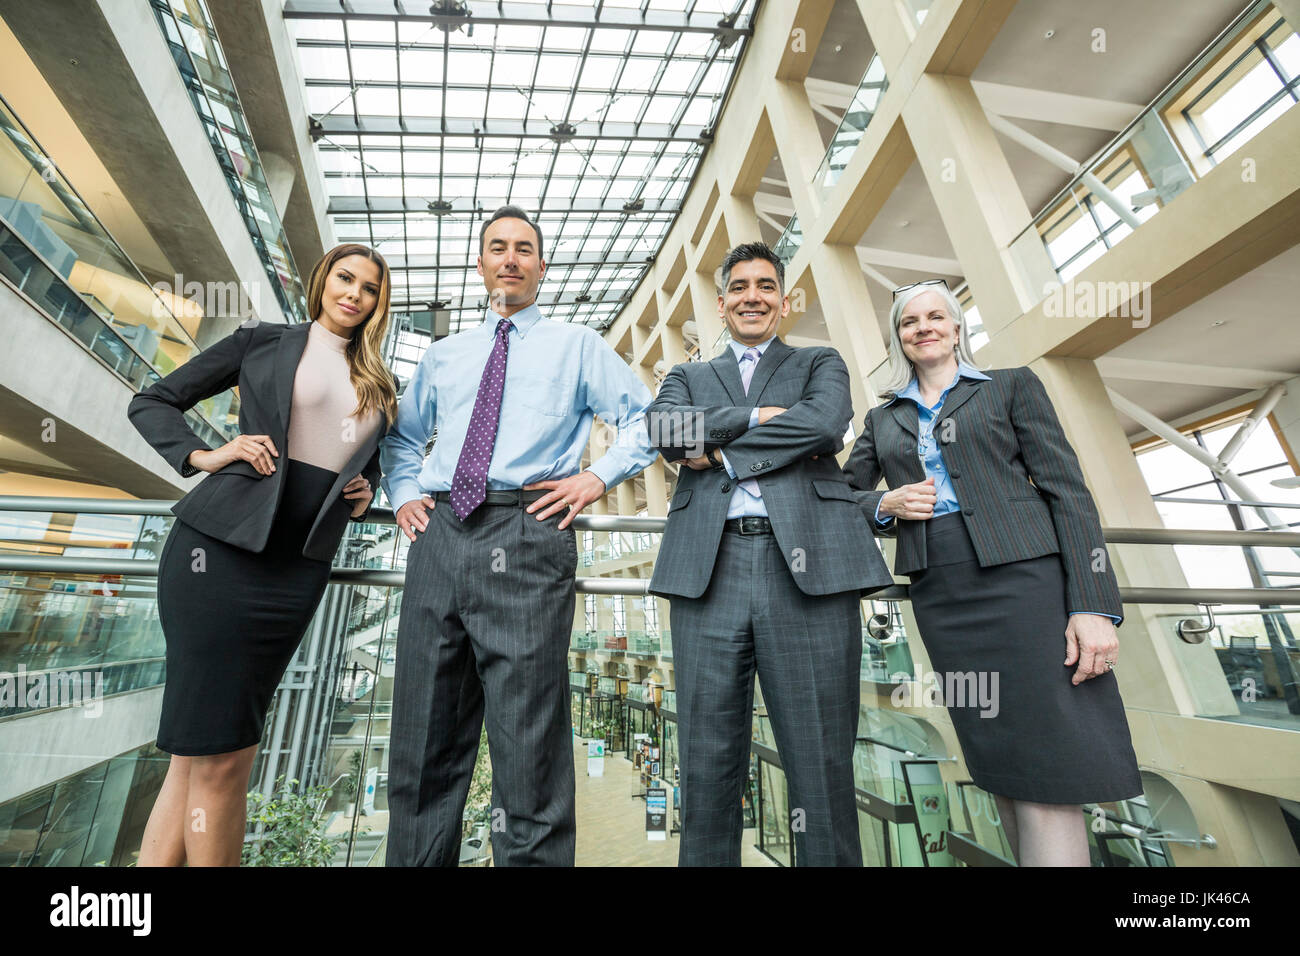 Portrait of smiling business people in lobby Stock Photo